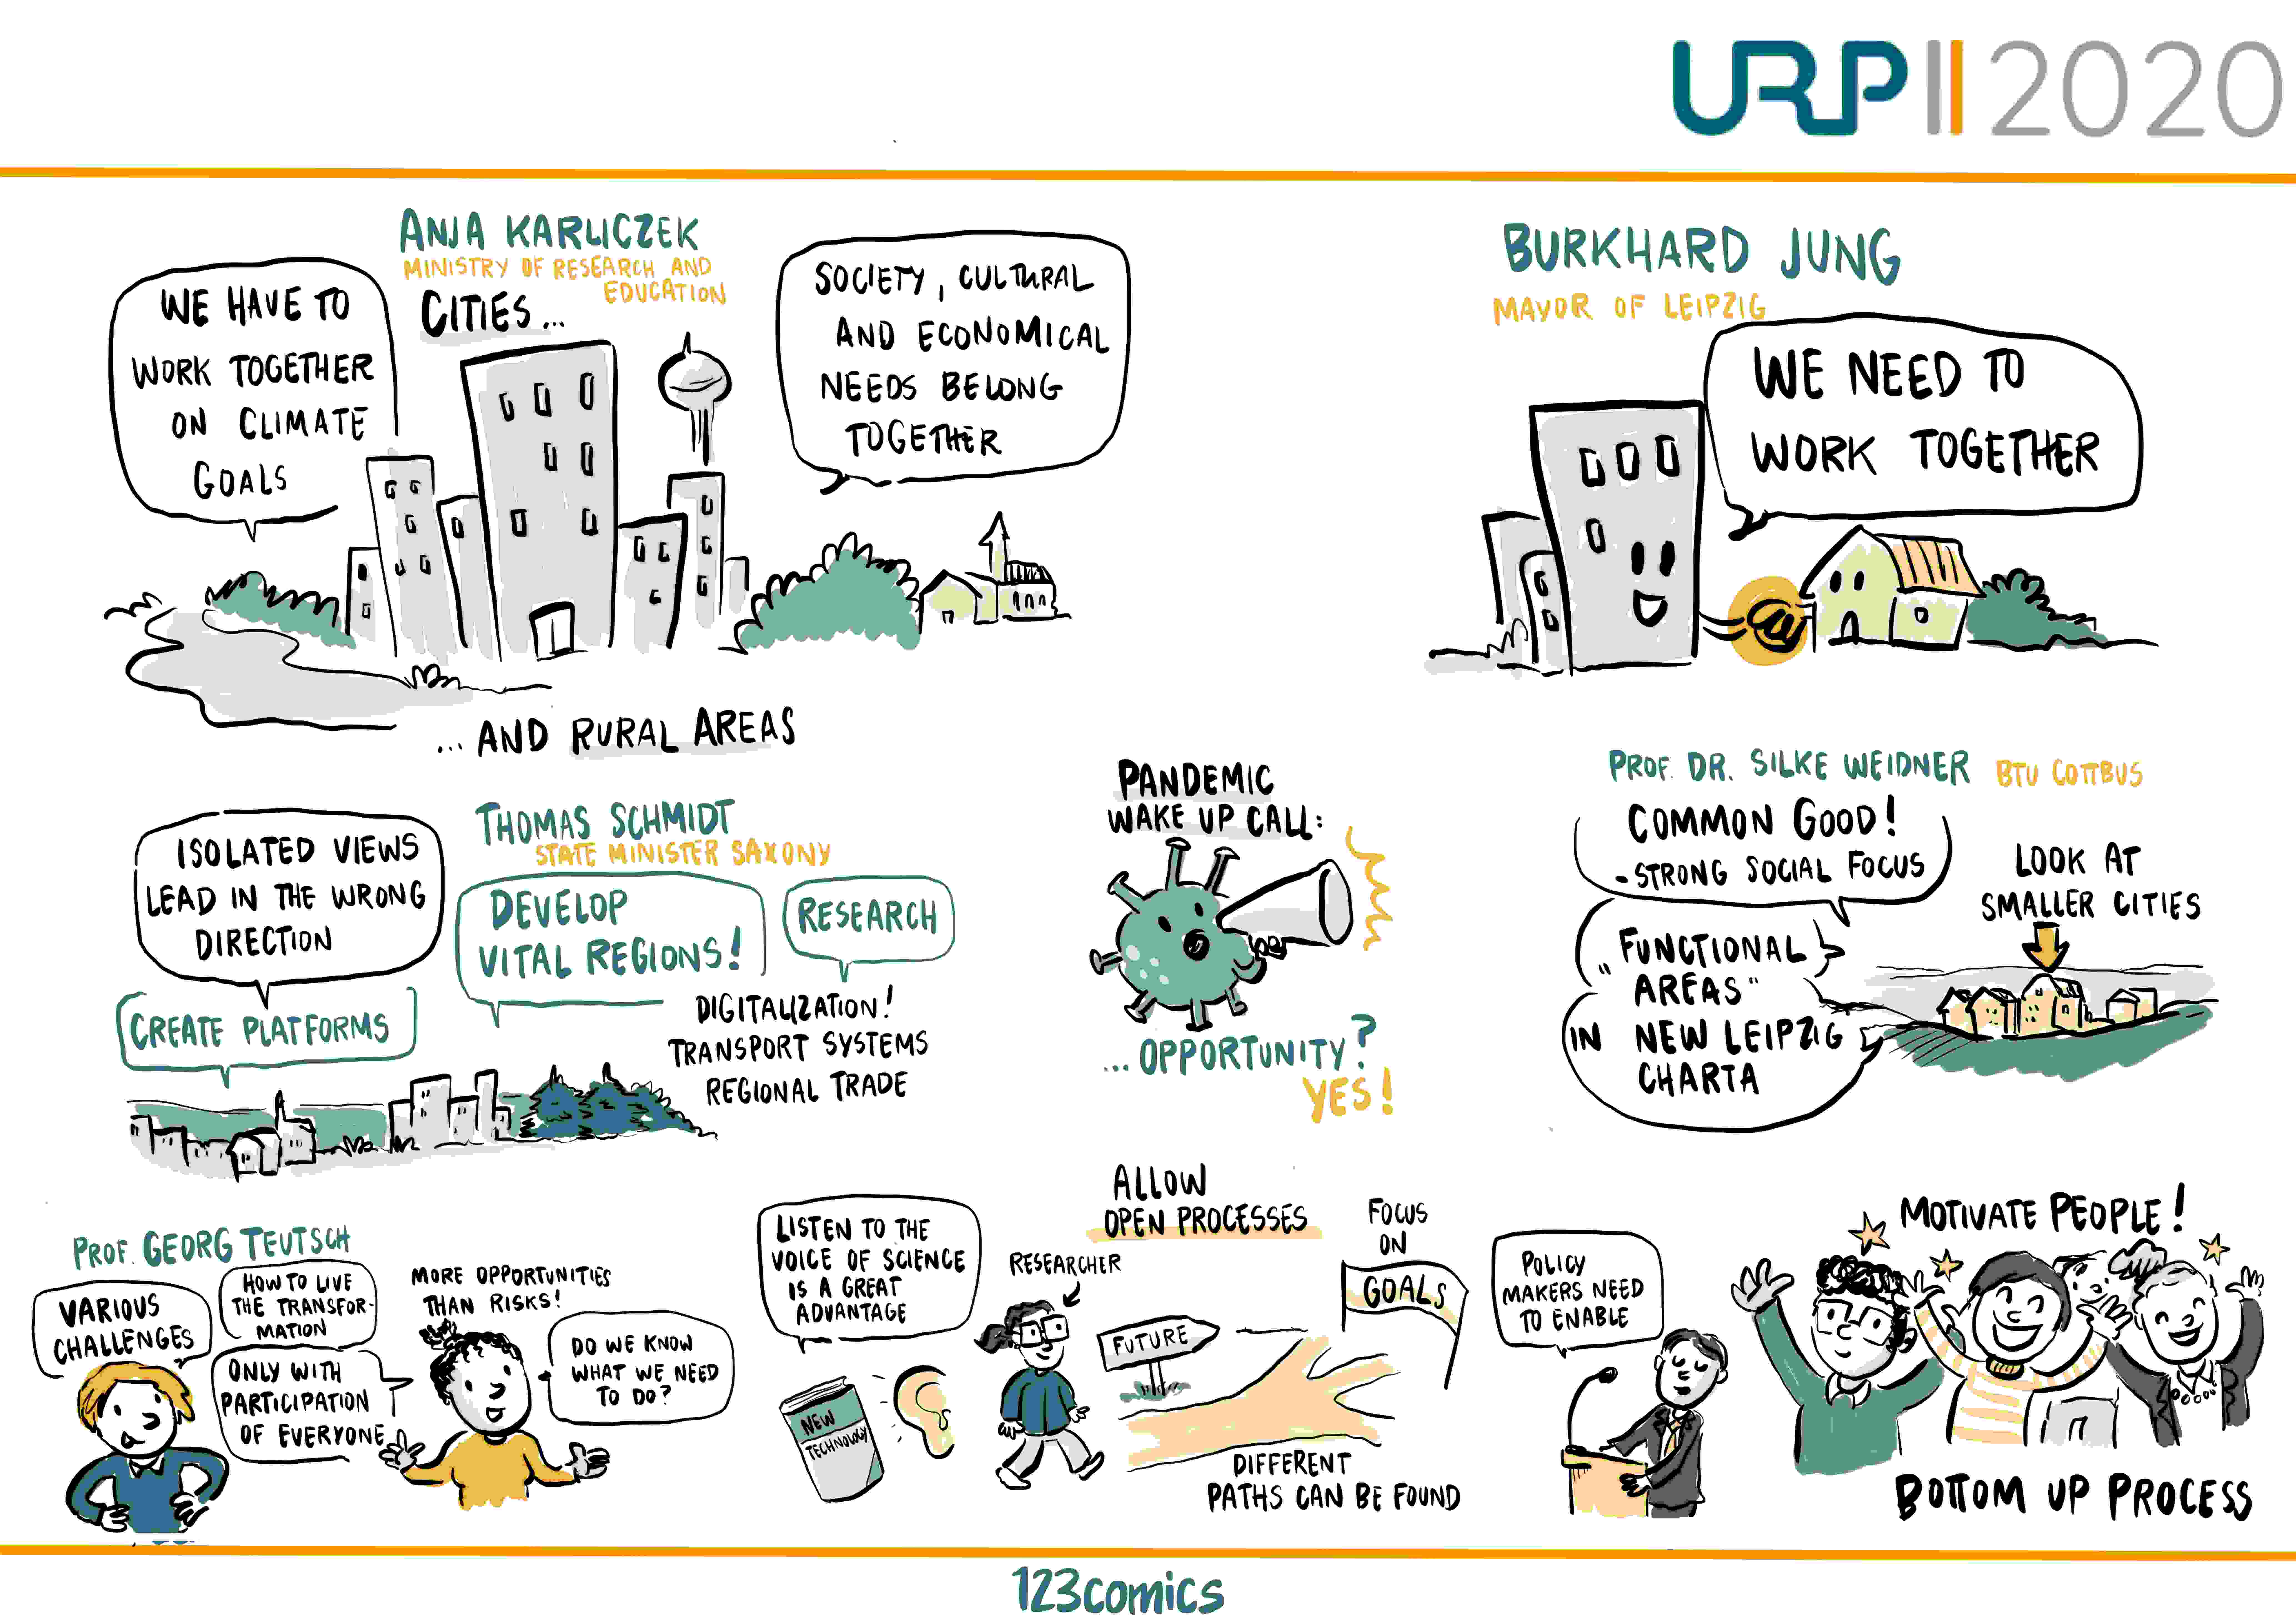 Graphic Recording of the URP2020 Opening Ceremony